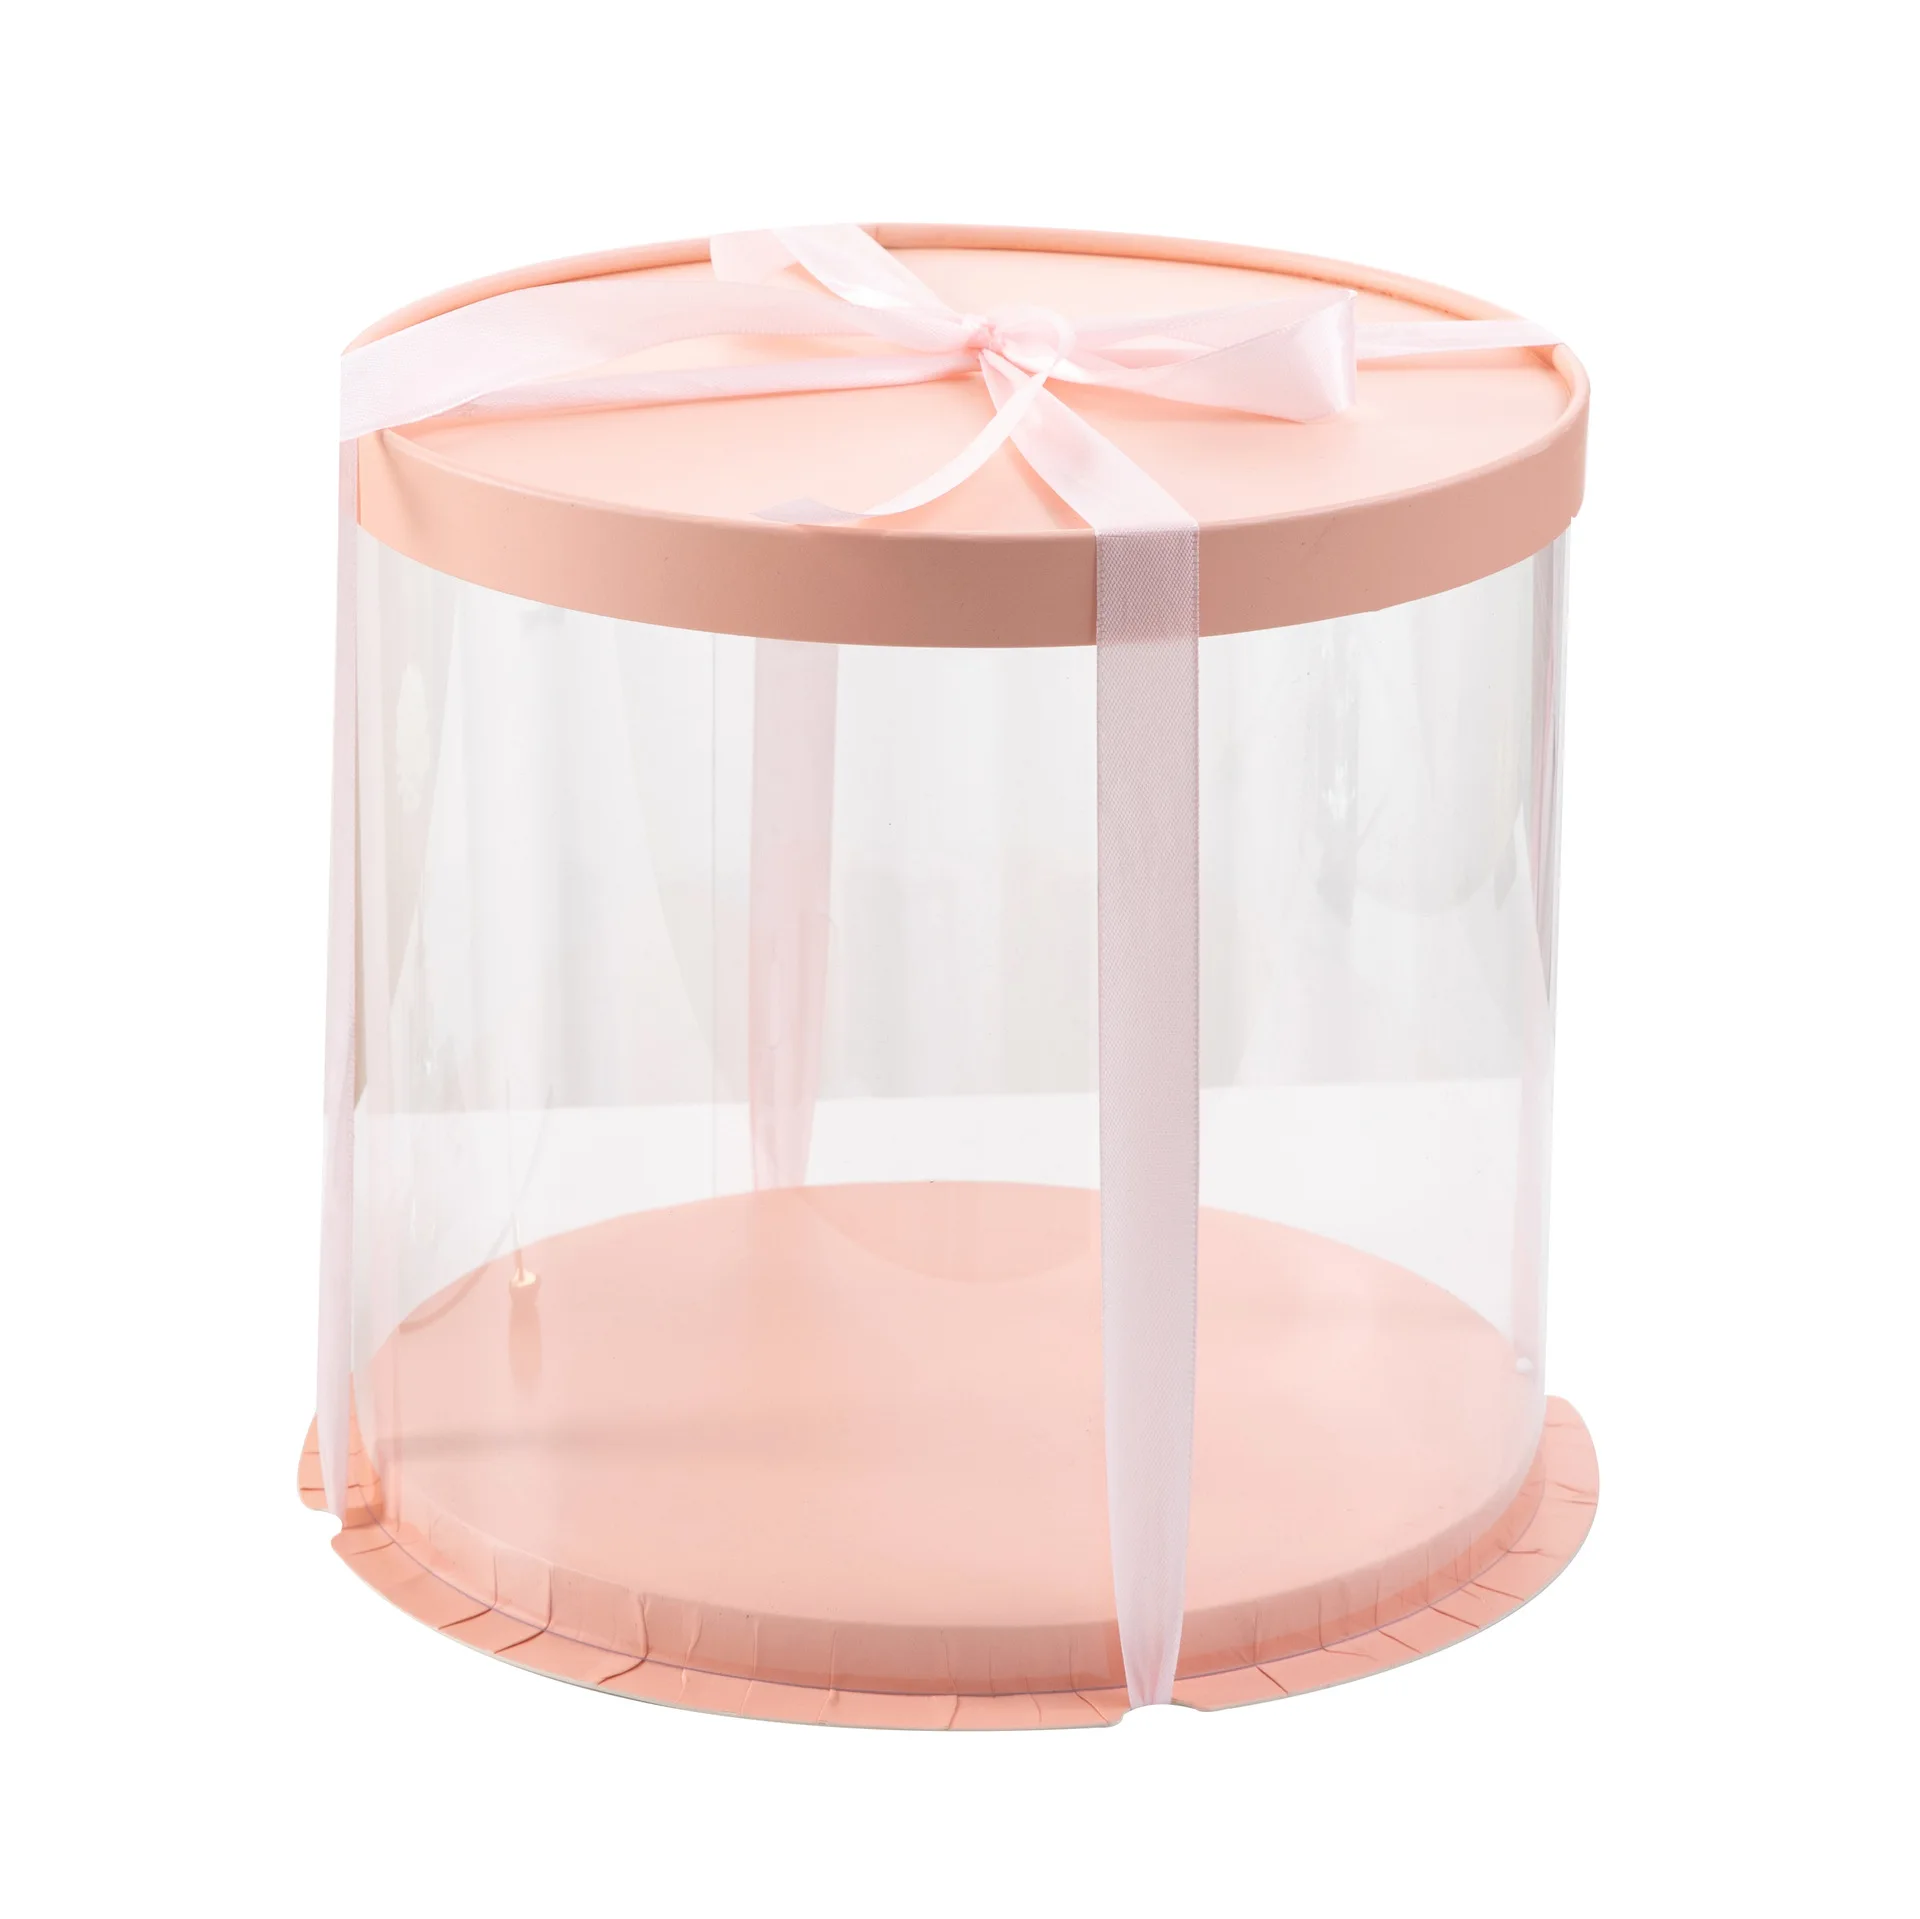 Amazon.com: 6 Sets Clear Cake Box with Cake Boards Ribbons, 8x8x9 Inch Transparent  Cake Containers Pack Baking Box Cupcake Boxes Wedding Birthday Anniversary  Portable Tall Layer Bakery Box for 6 Inch Cakes :